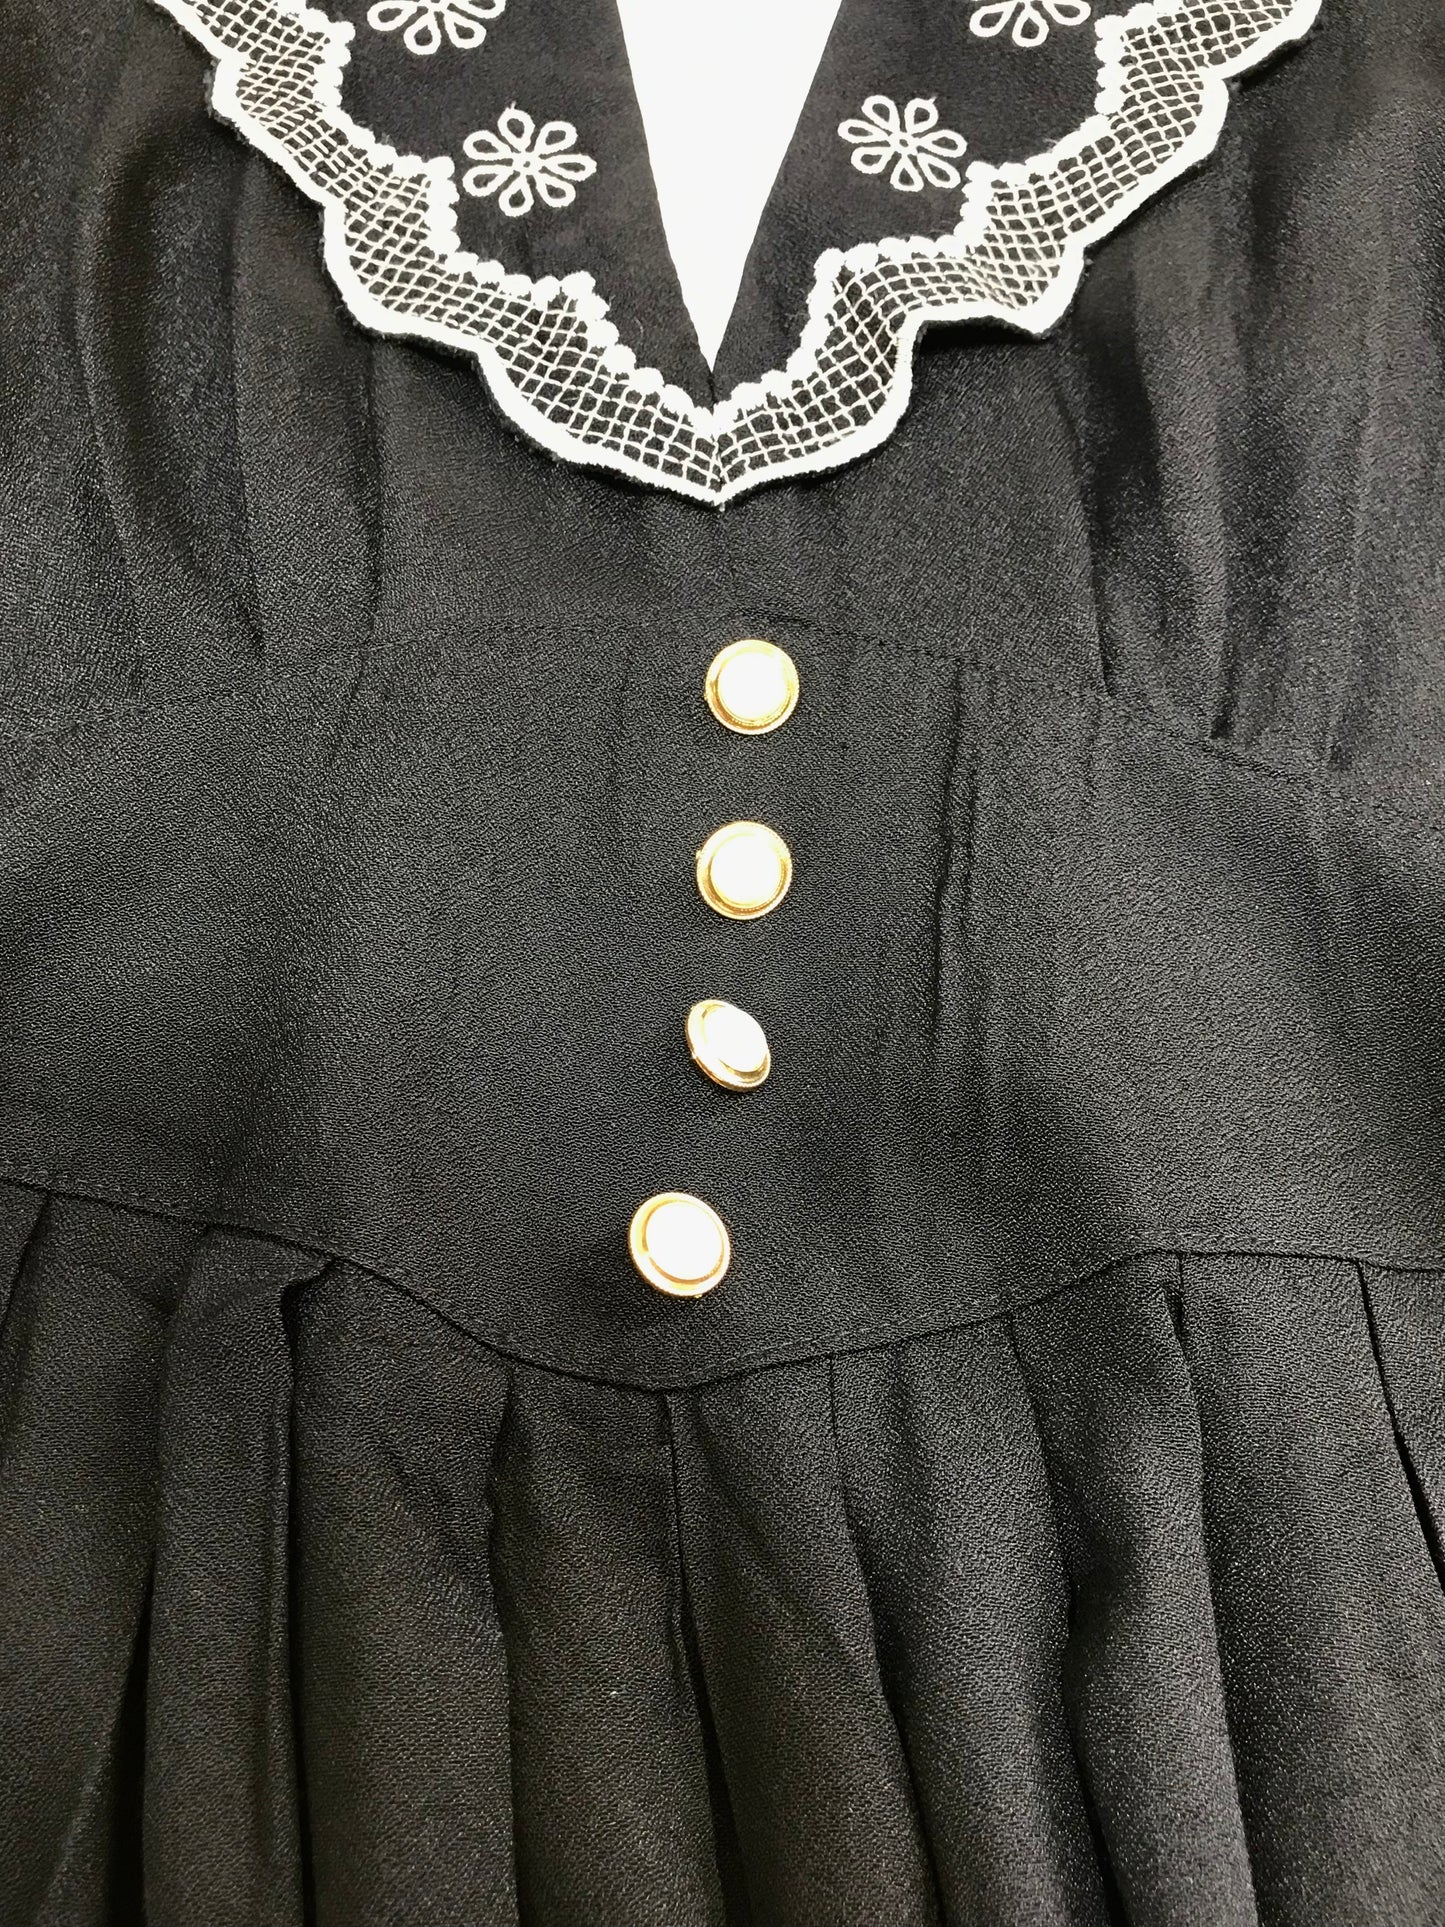 Vintage Dress MADE IN USA [G24565]